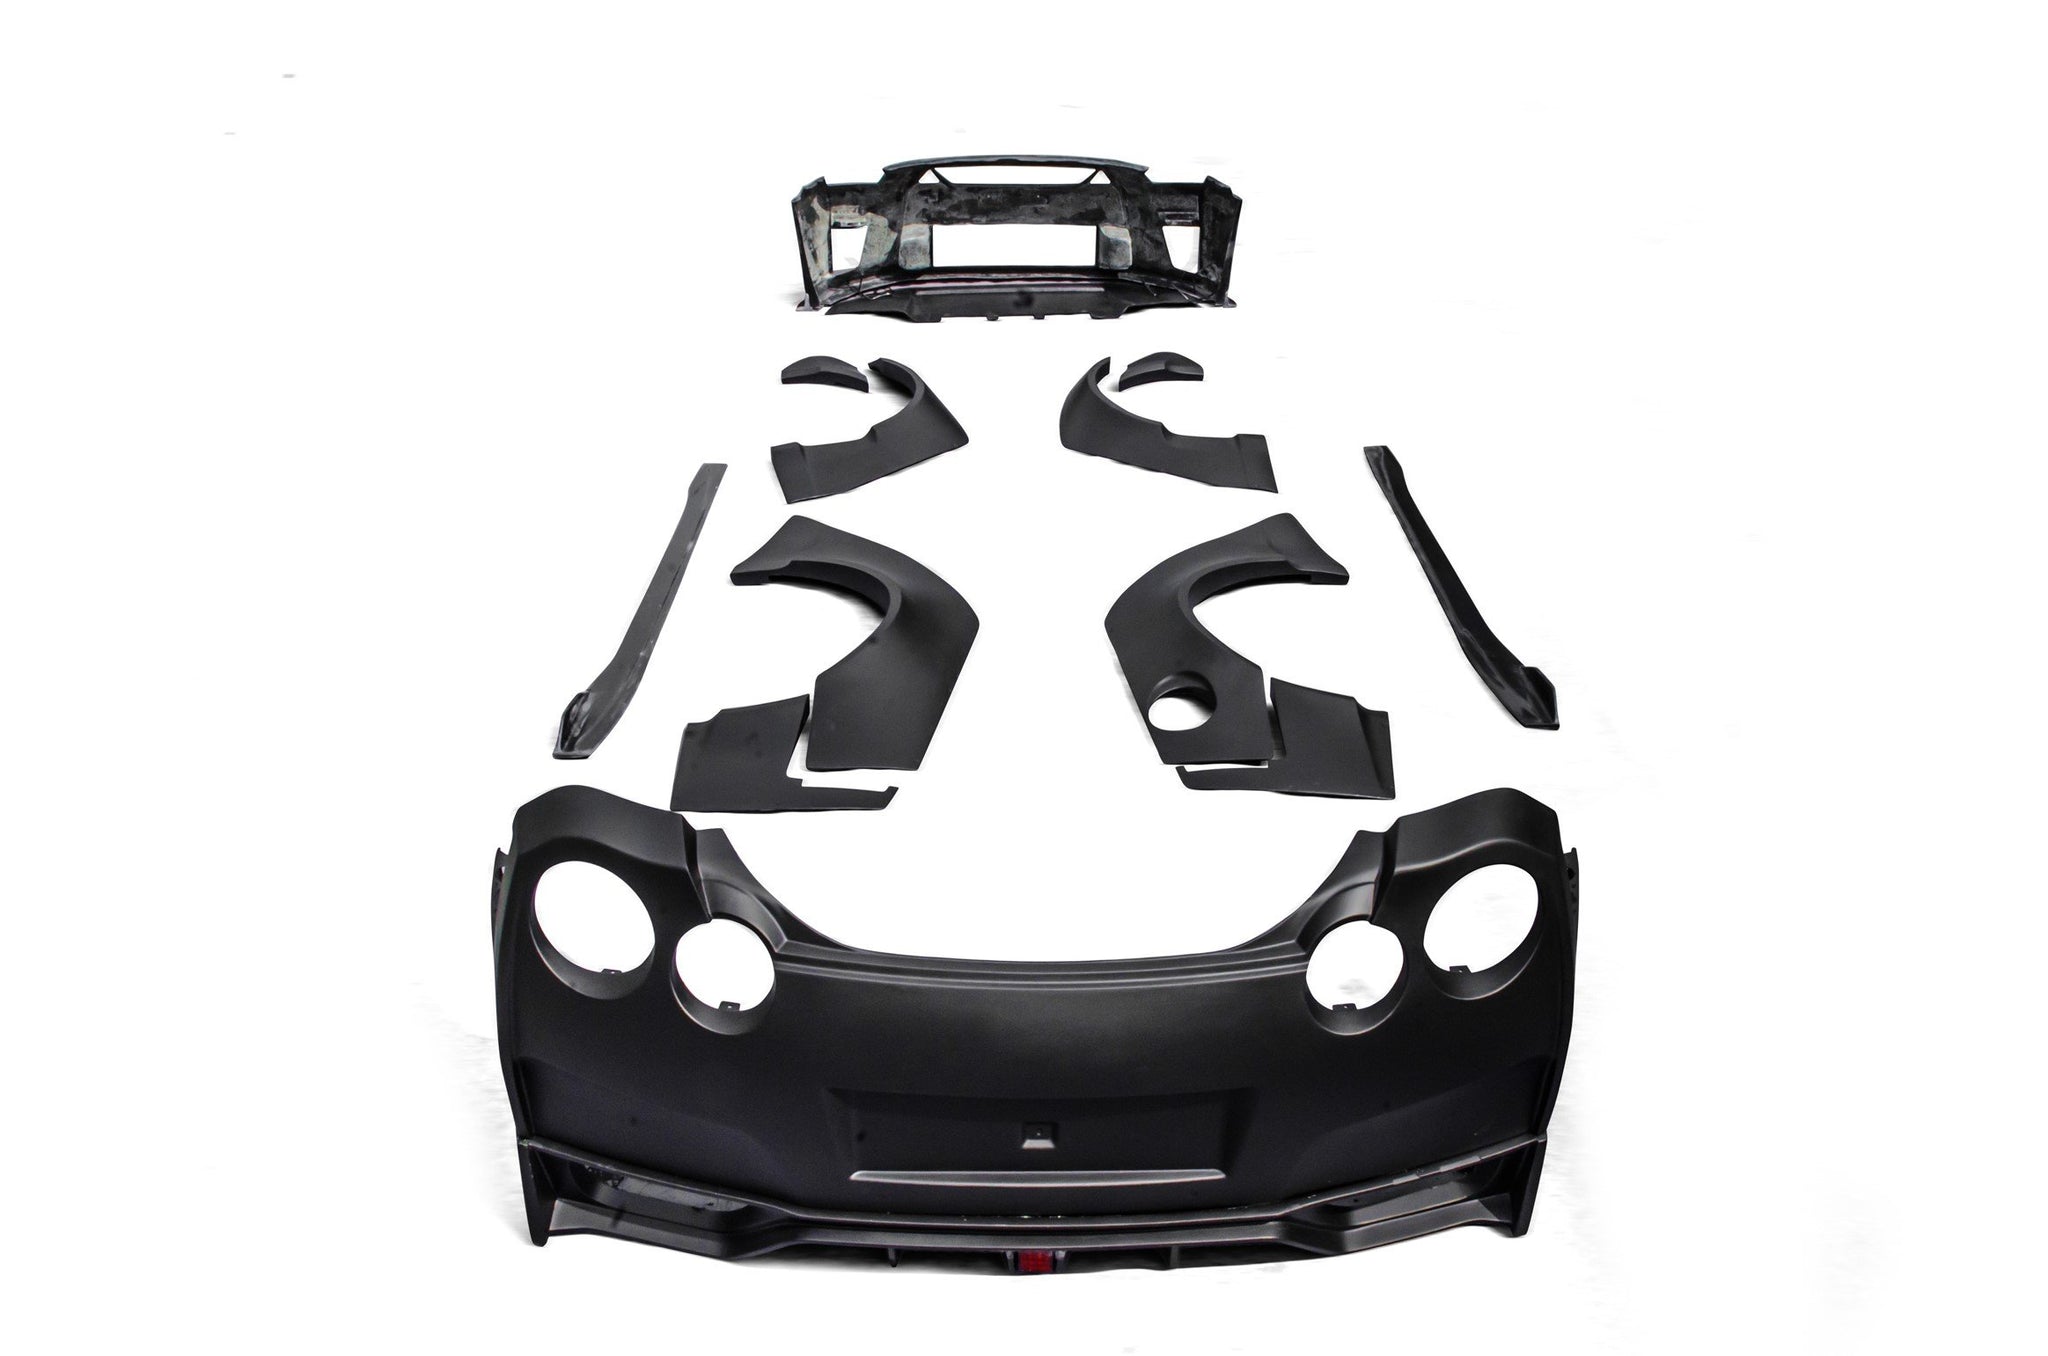 Check our price and buy CMST Carbon Fiber Body Kit set for Nissan GTR GT-R R35 !